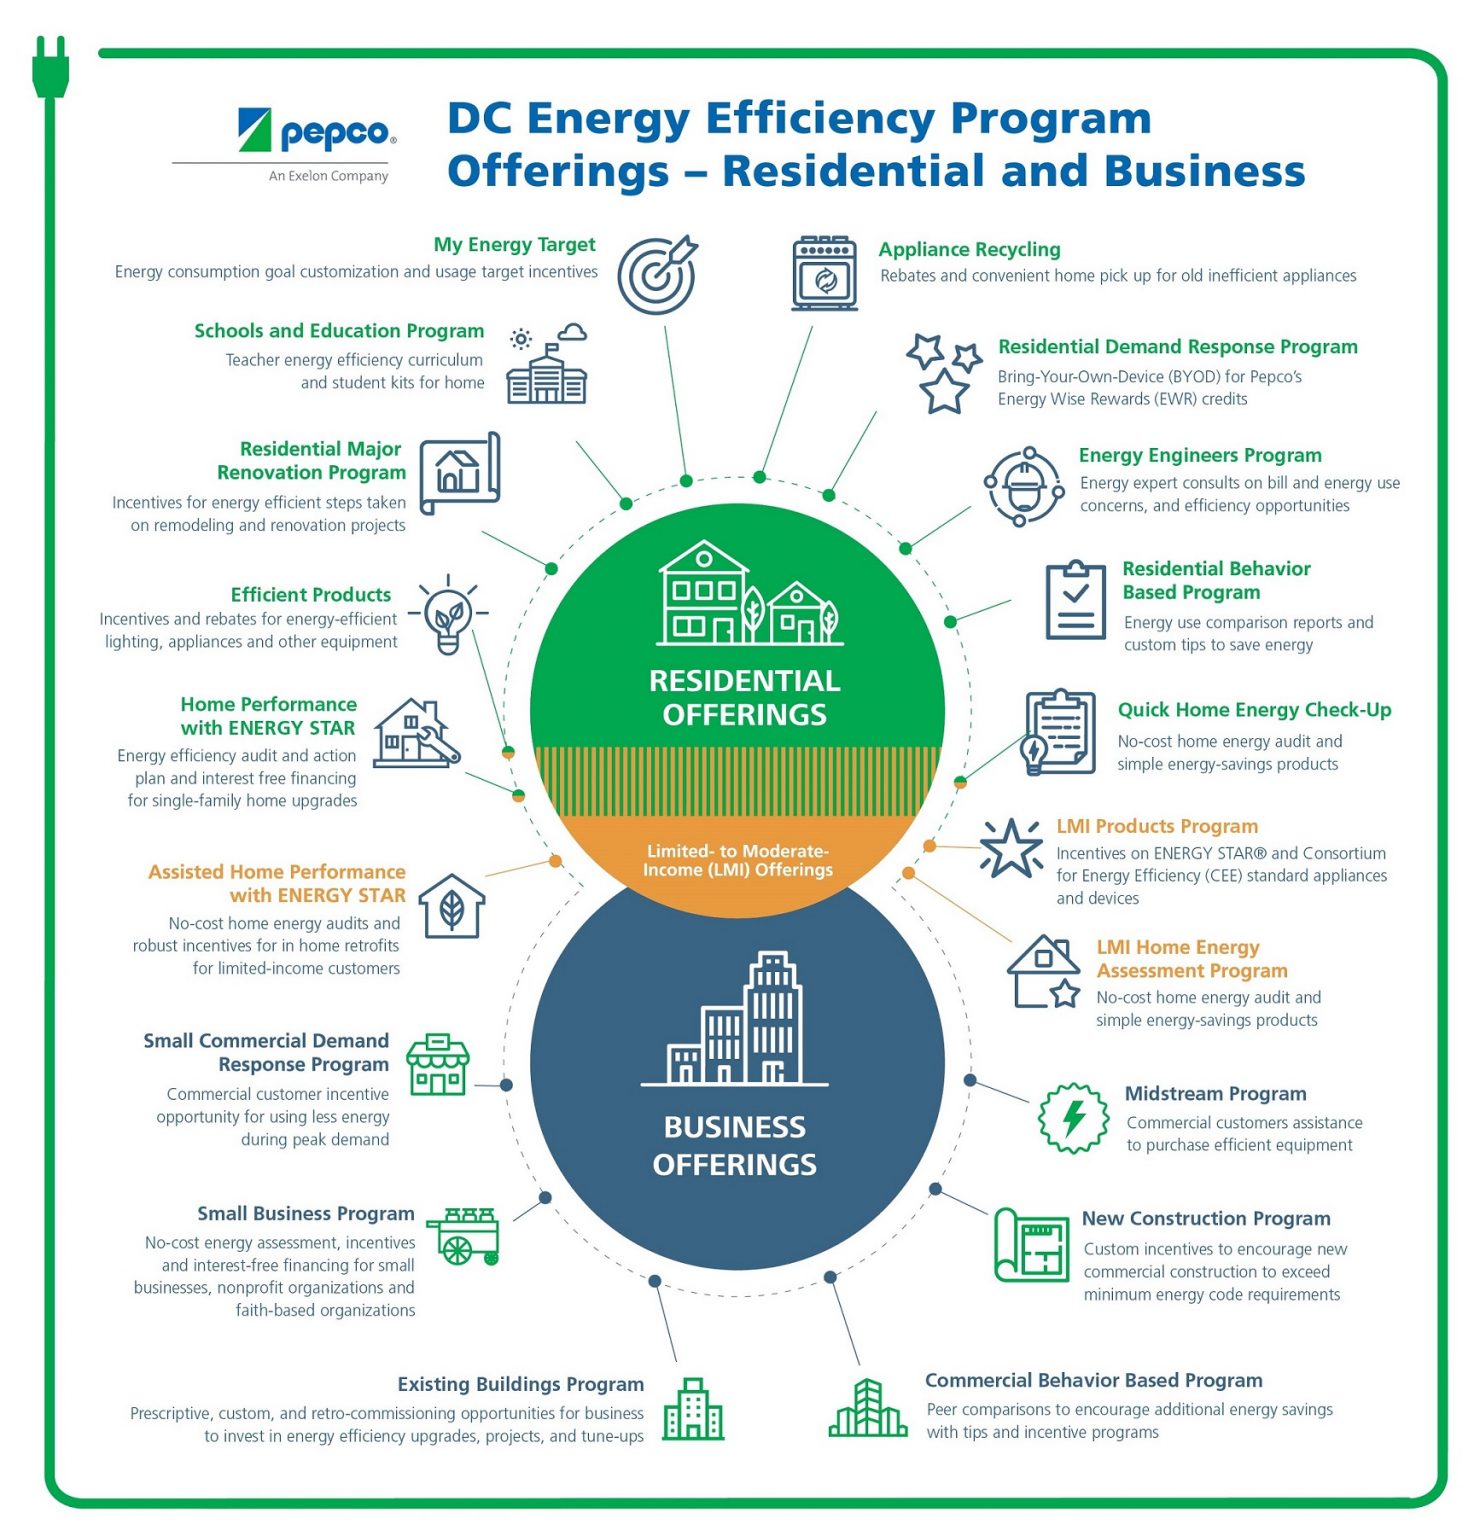 newly-proposed-pepco-energy-efficiency-programs-to-help-washington-d-c